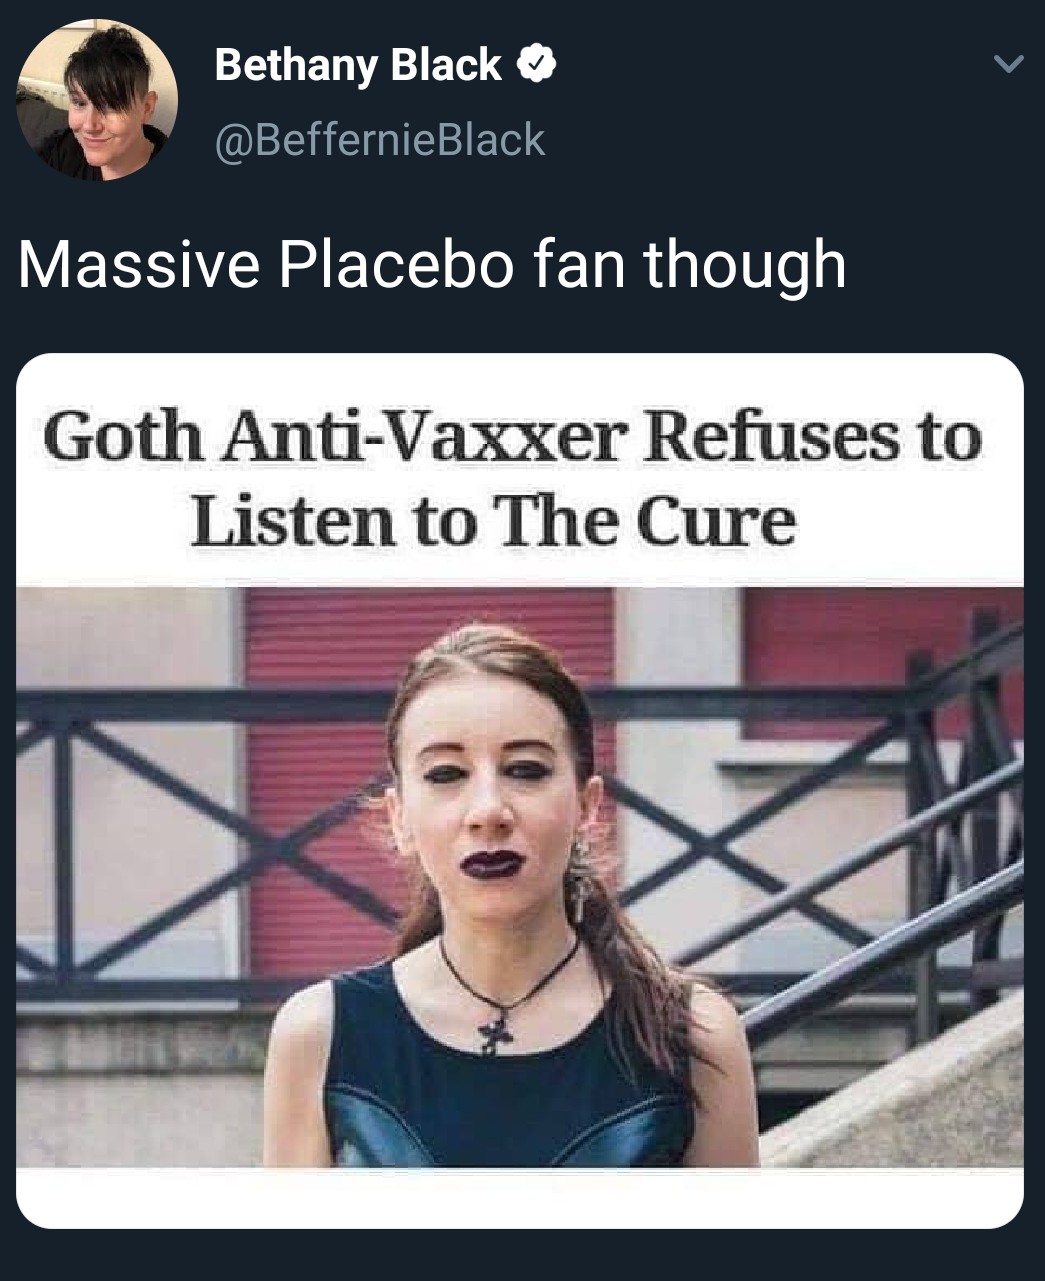 goth anti vaxxer - Bethany Black Massive Placebo fan though Goth AntiVaxxer Refuses to Listen to The Cure